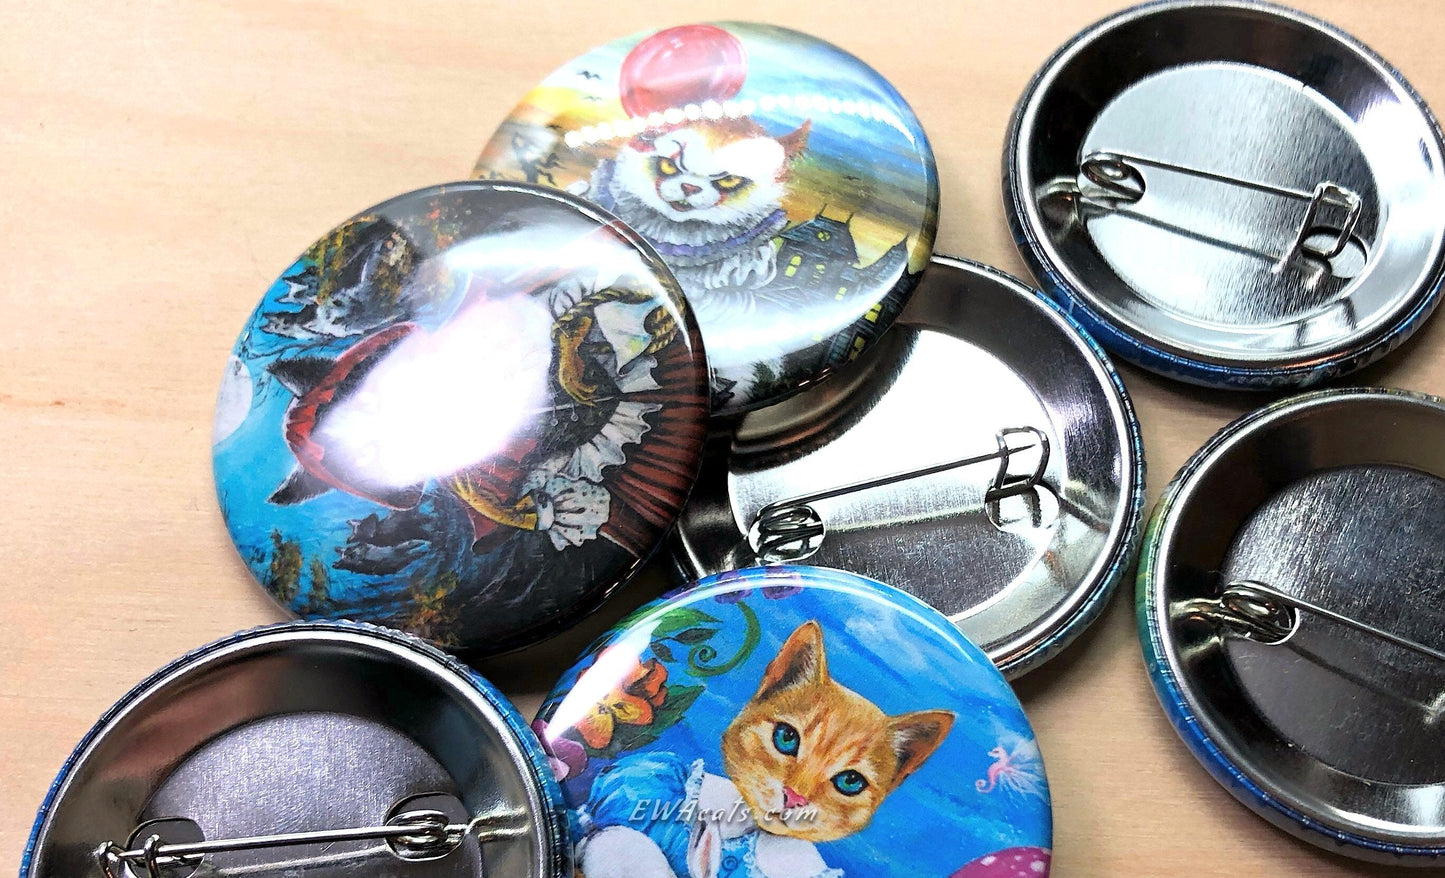 Button "Jack and Sally Meows"